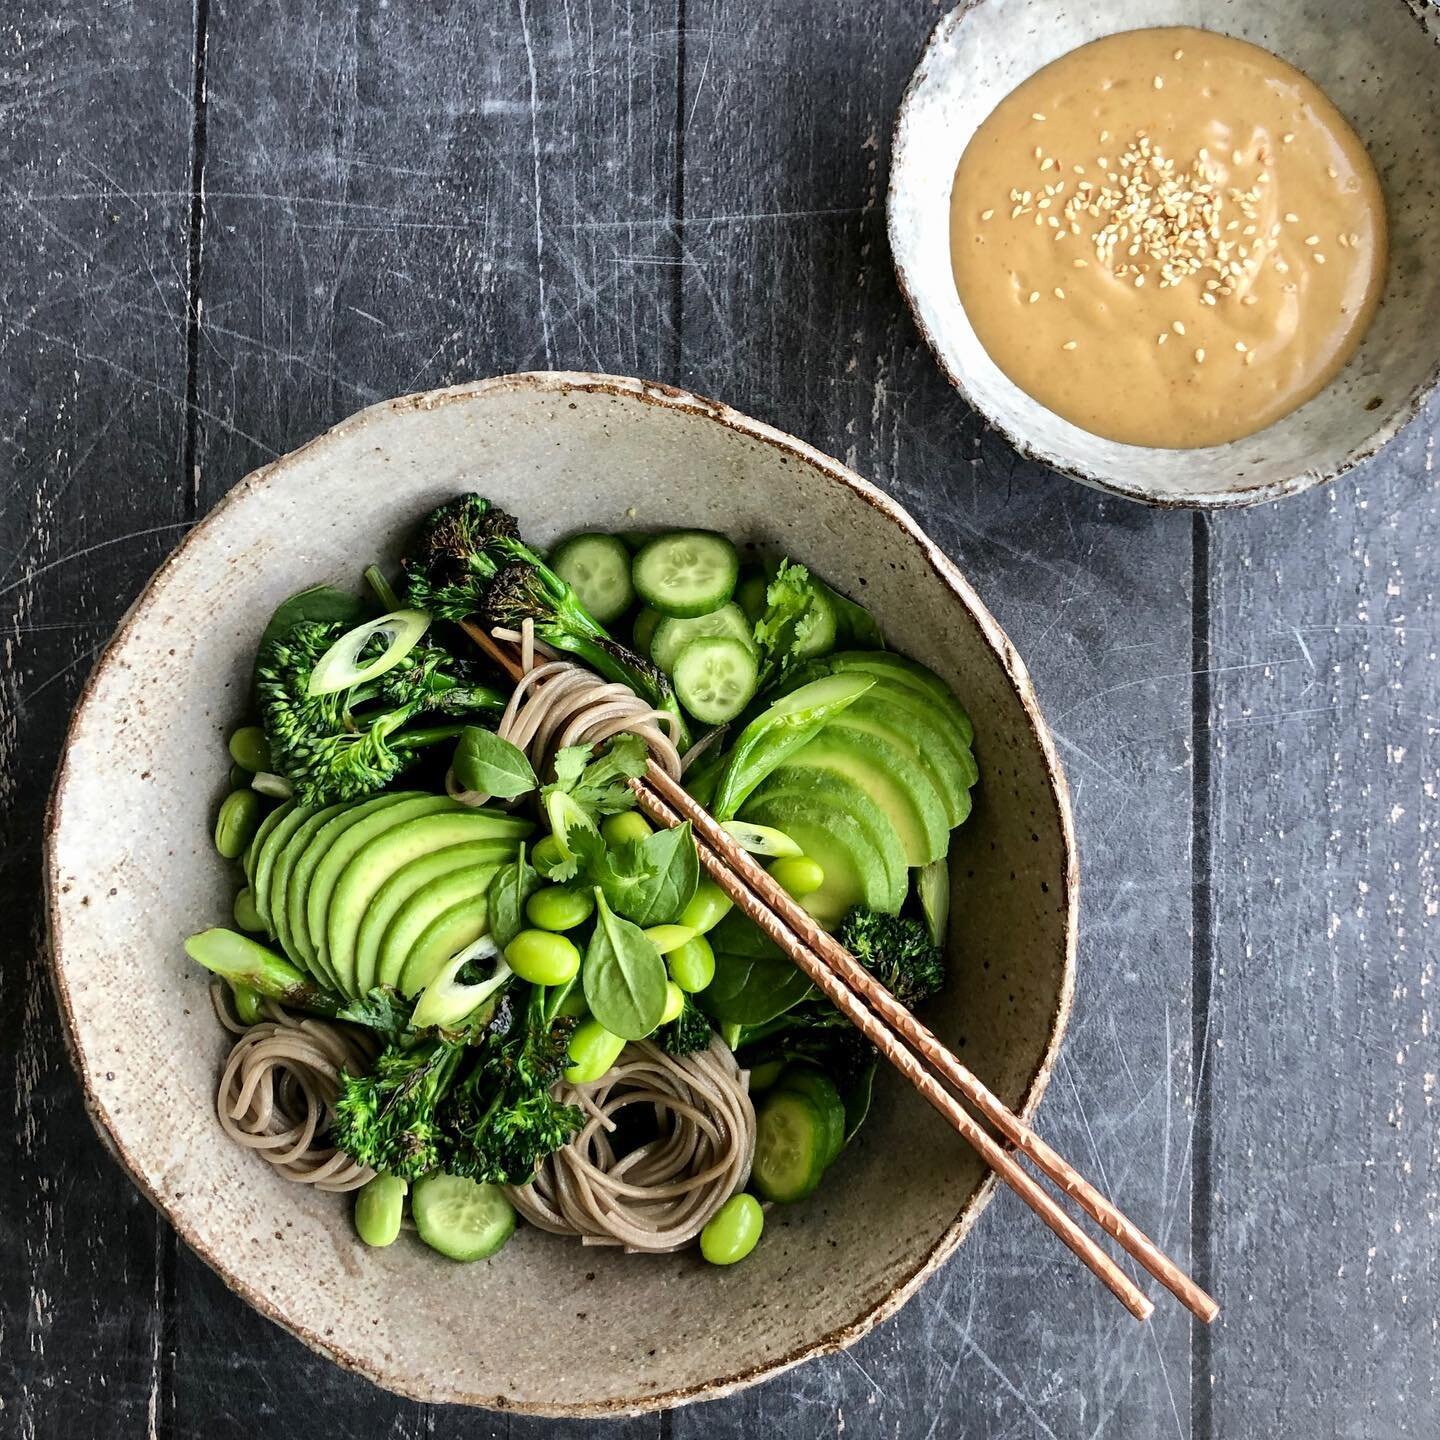 Here it is! Edamame, broccolini, avocado and sobs noodle salad with roasted sesame vegan mayo. 

And easy and delicious excuse to eat one of my all time favourite dressing. 

Check out the recipe at www.dearfig.com 

#sobanoodlesalad #sobanoodles #ja